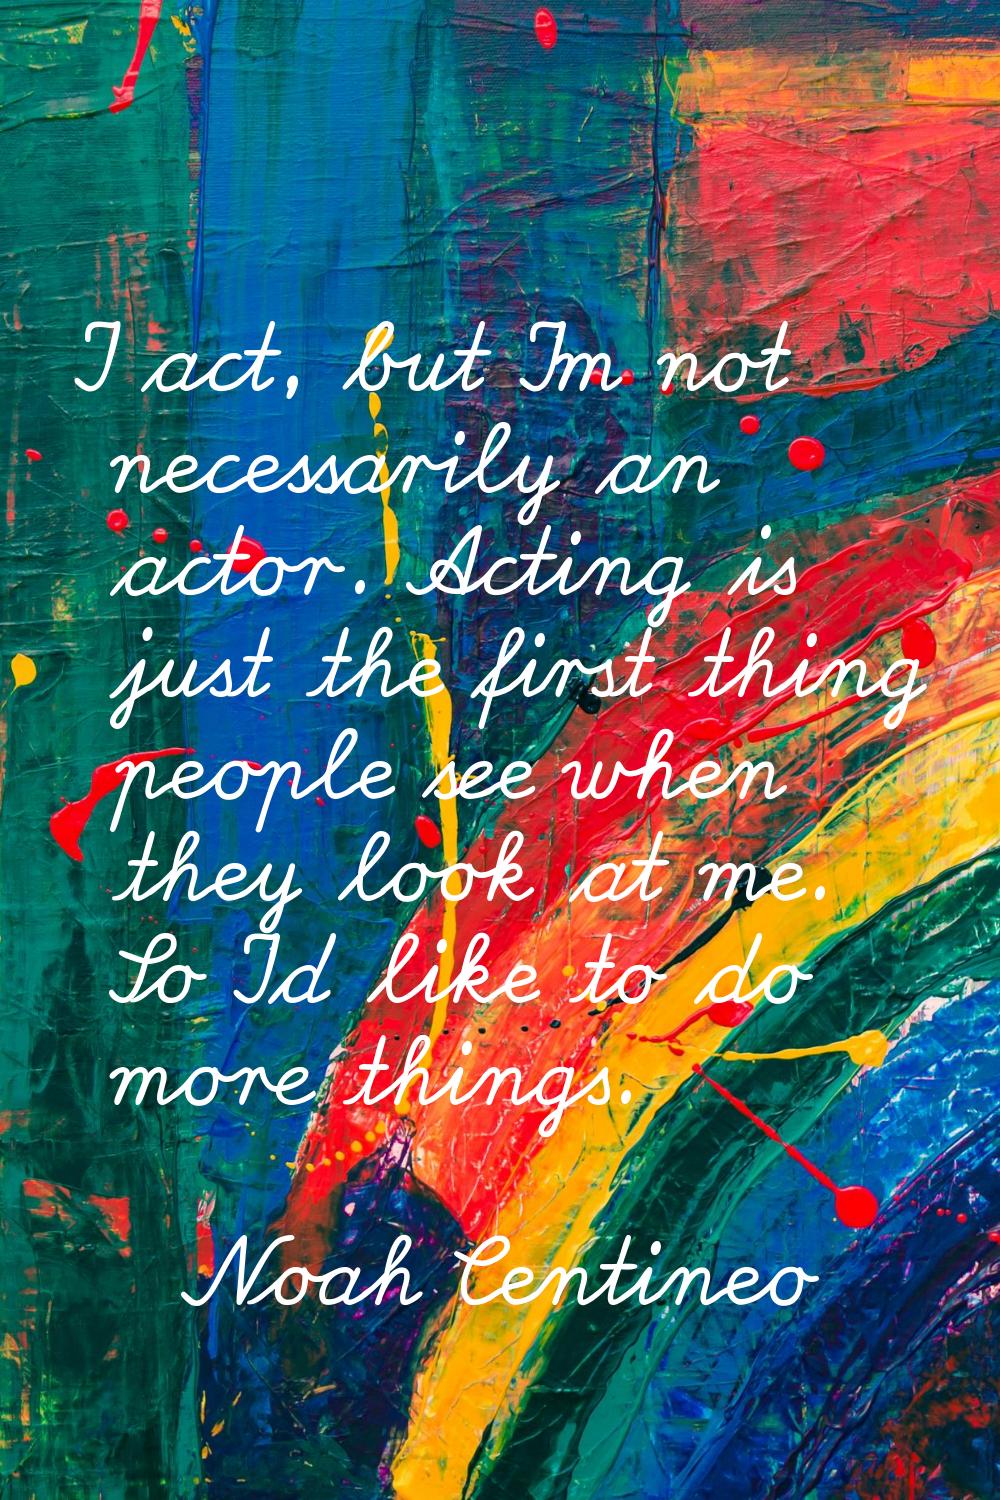 I act, but I'm not necessarily an actor. Acting is just the first thing people see when they look a